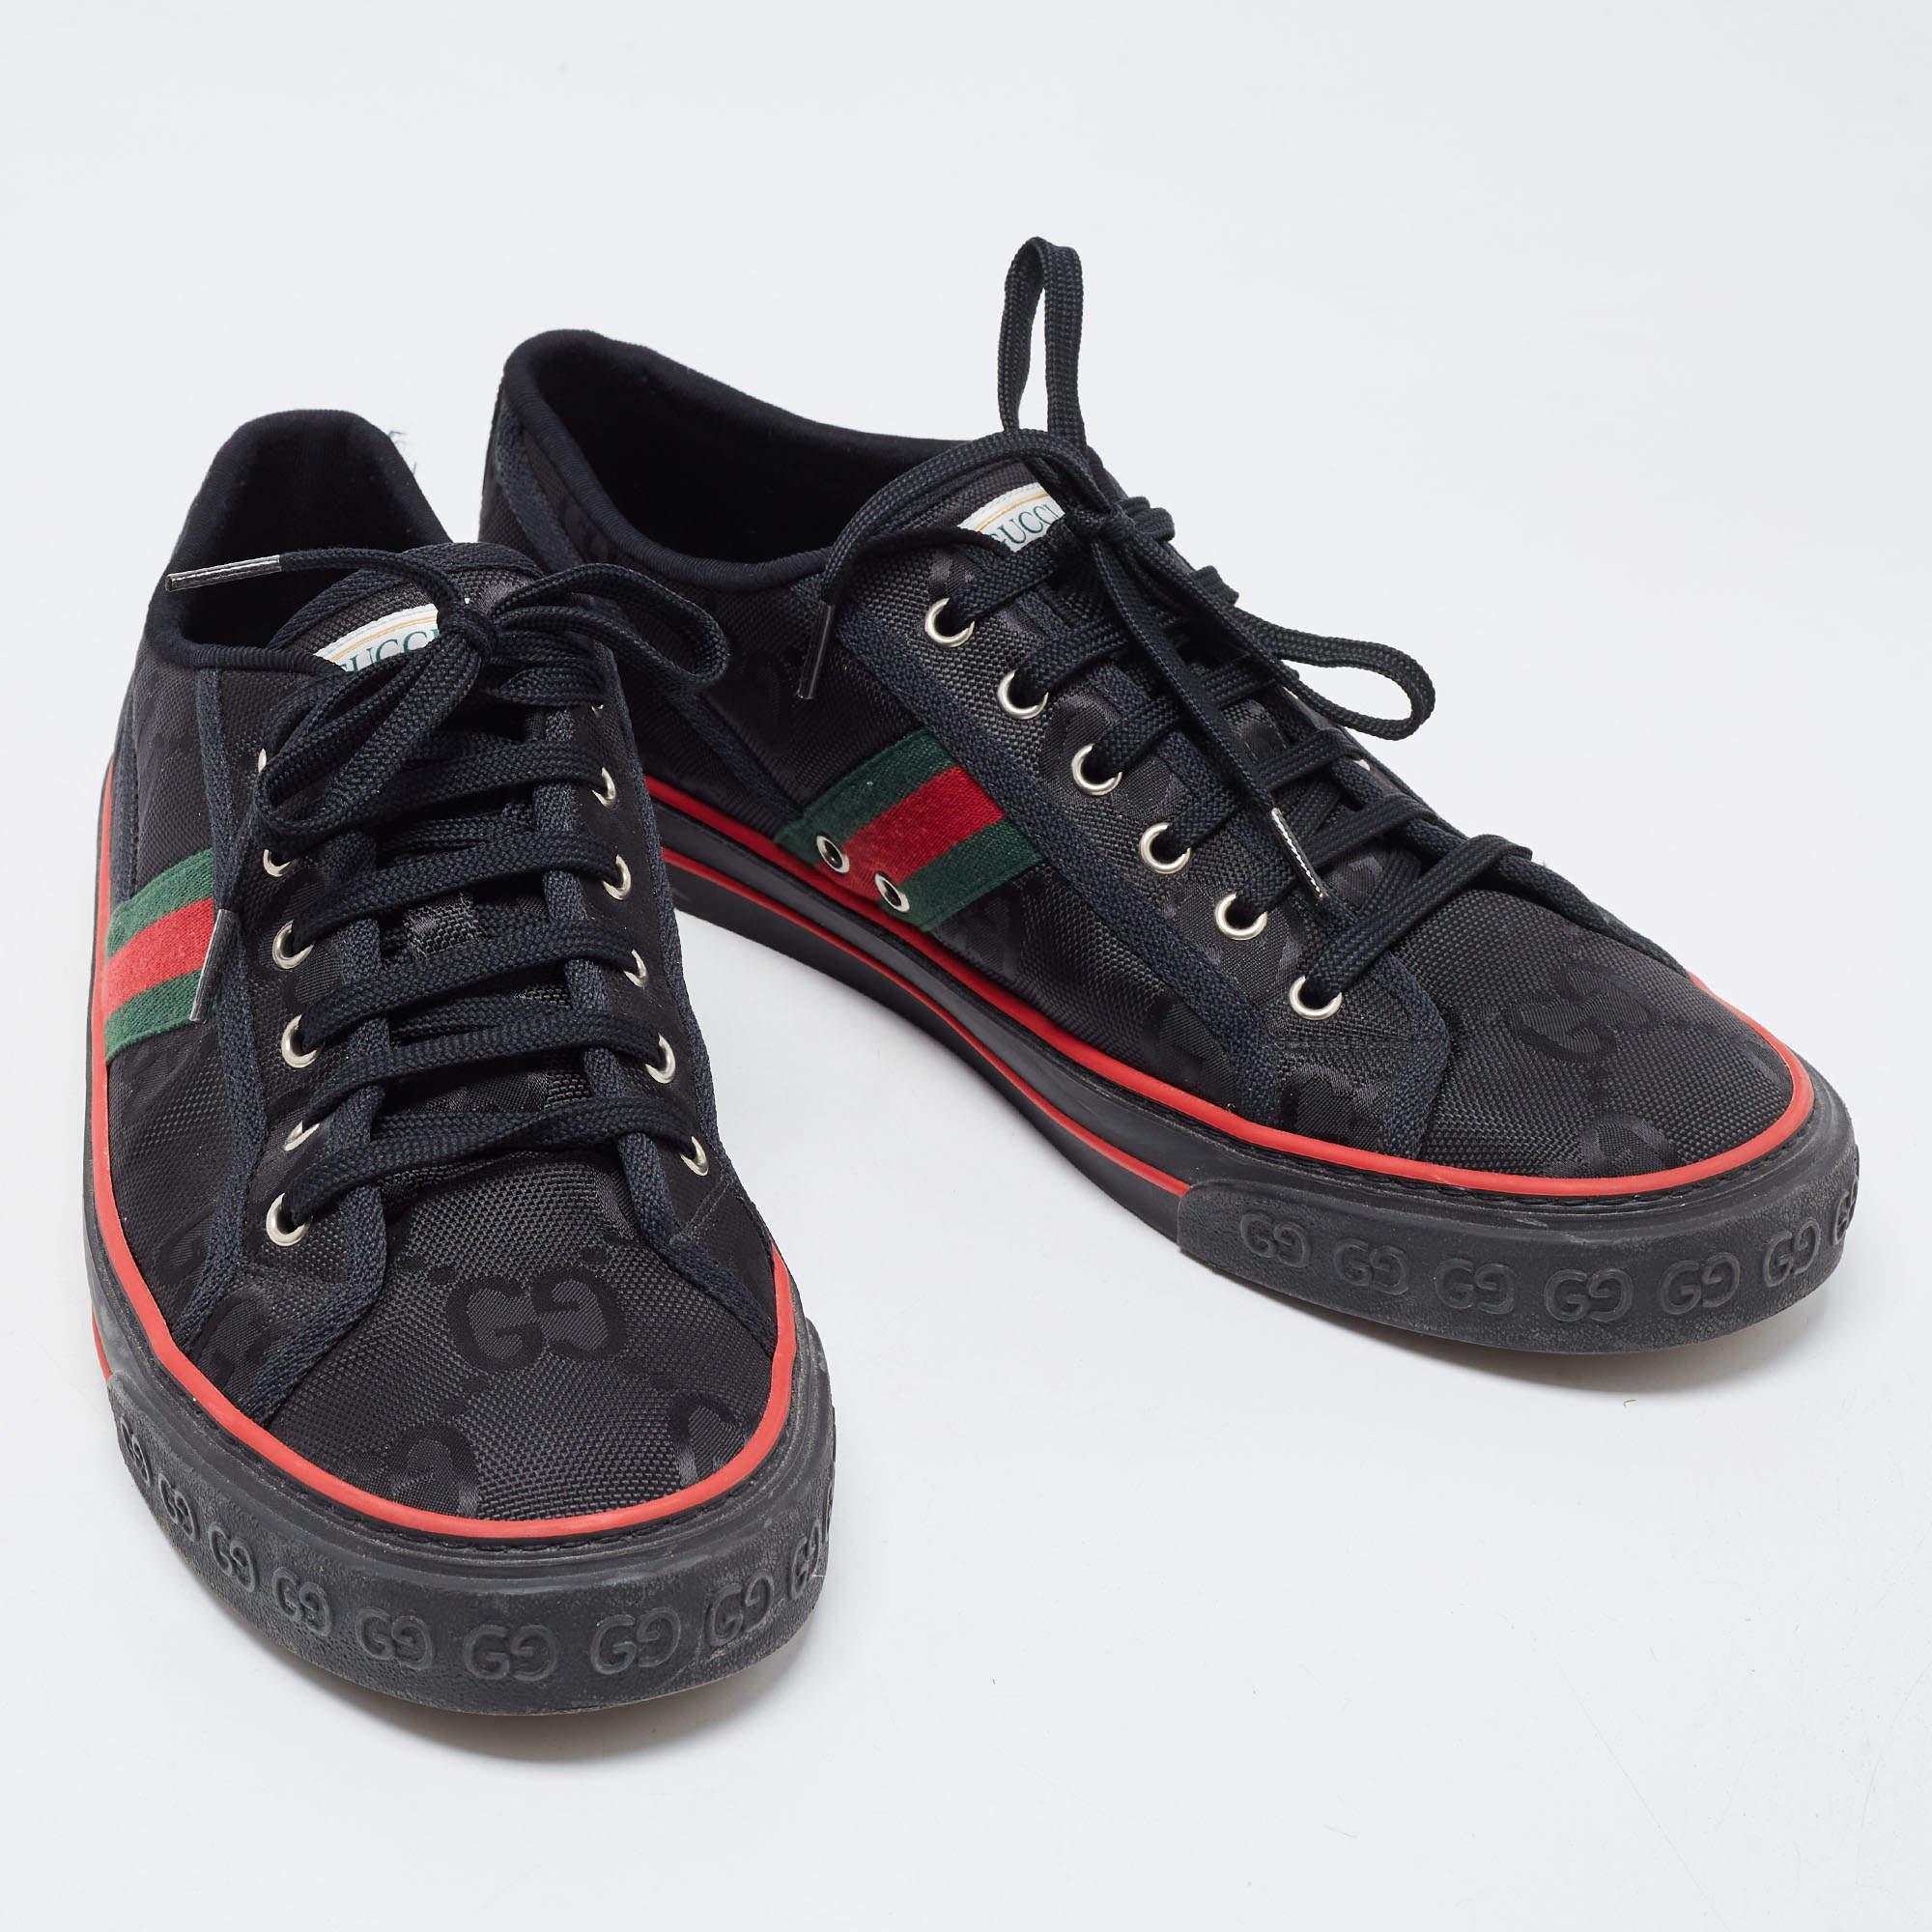 Gucci Black Canvas GG Web Low Top Sneakers Size 46 1